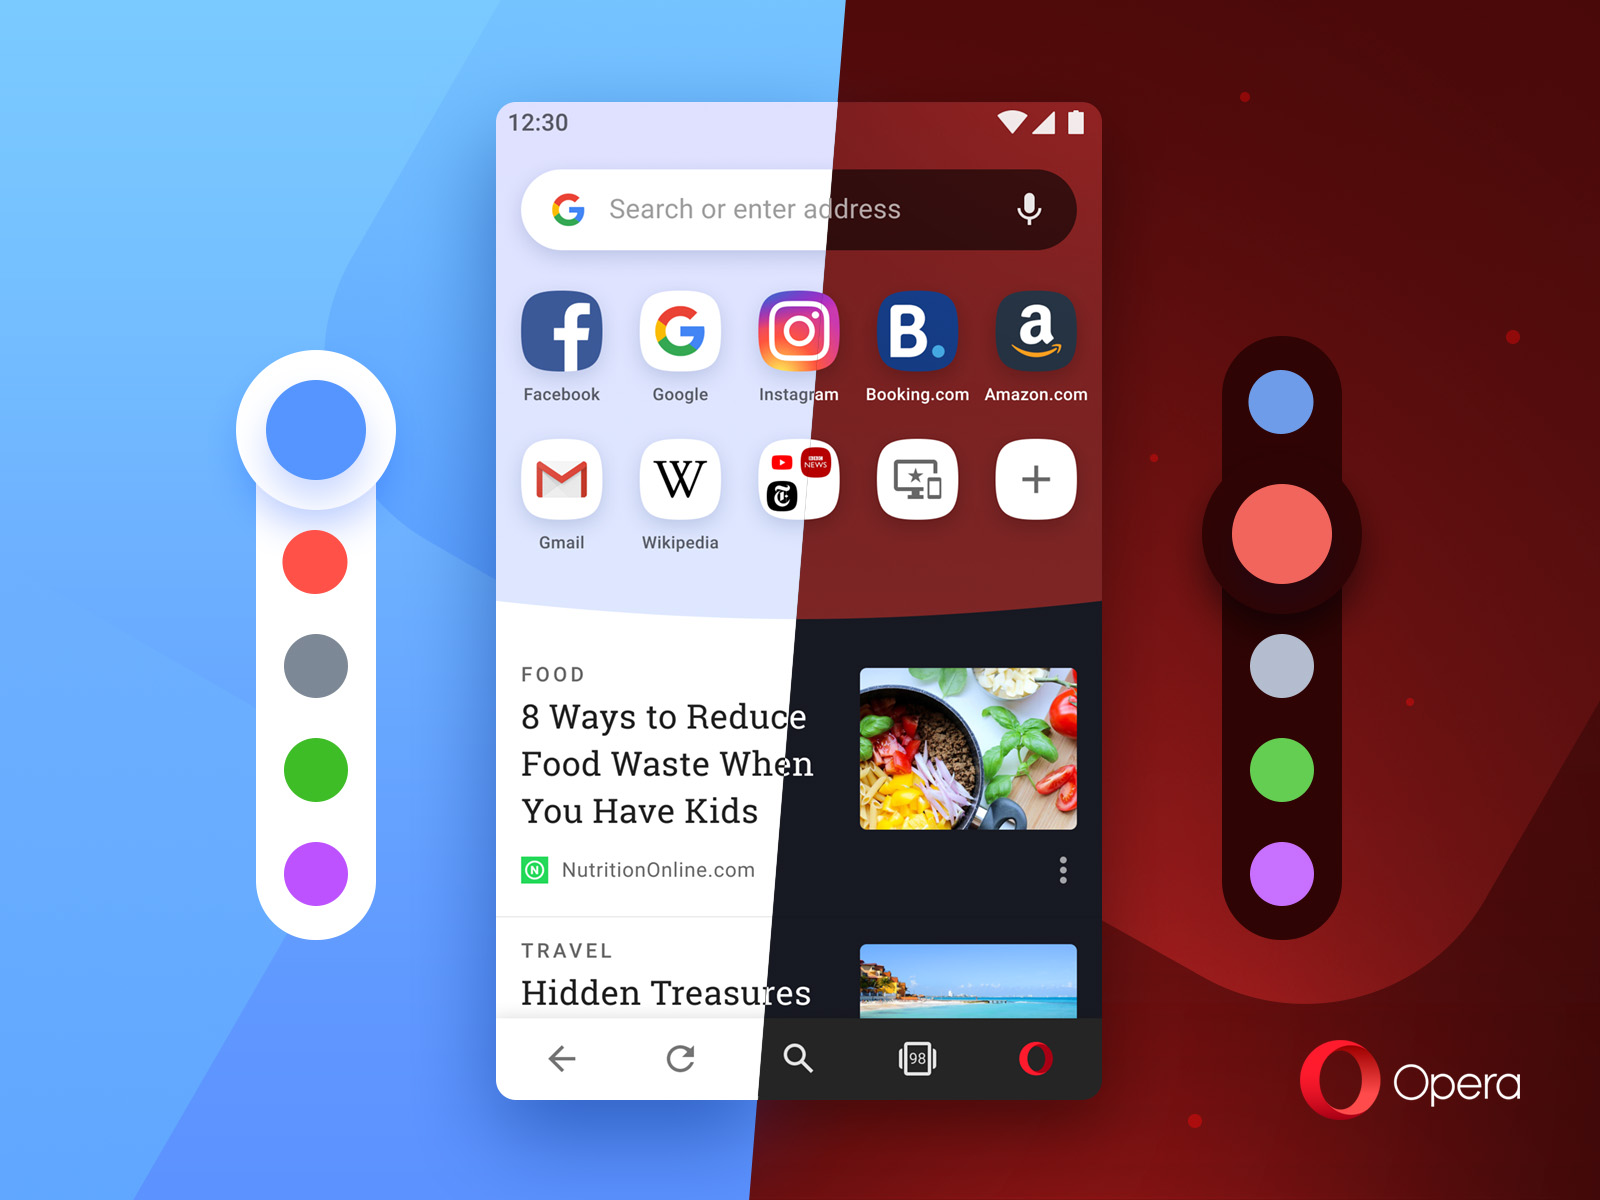 Opera for Android offers 10 colors to choose from